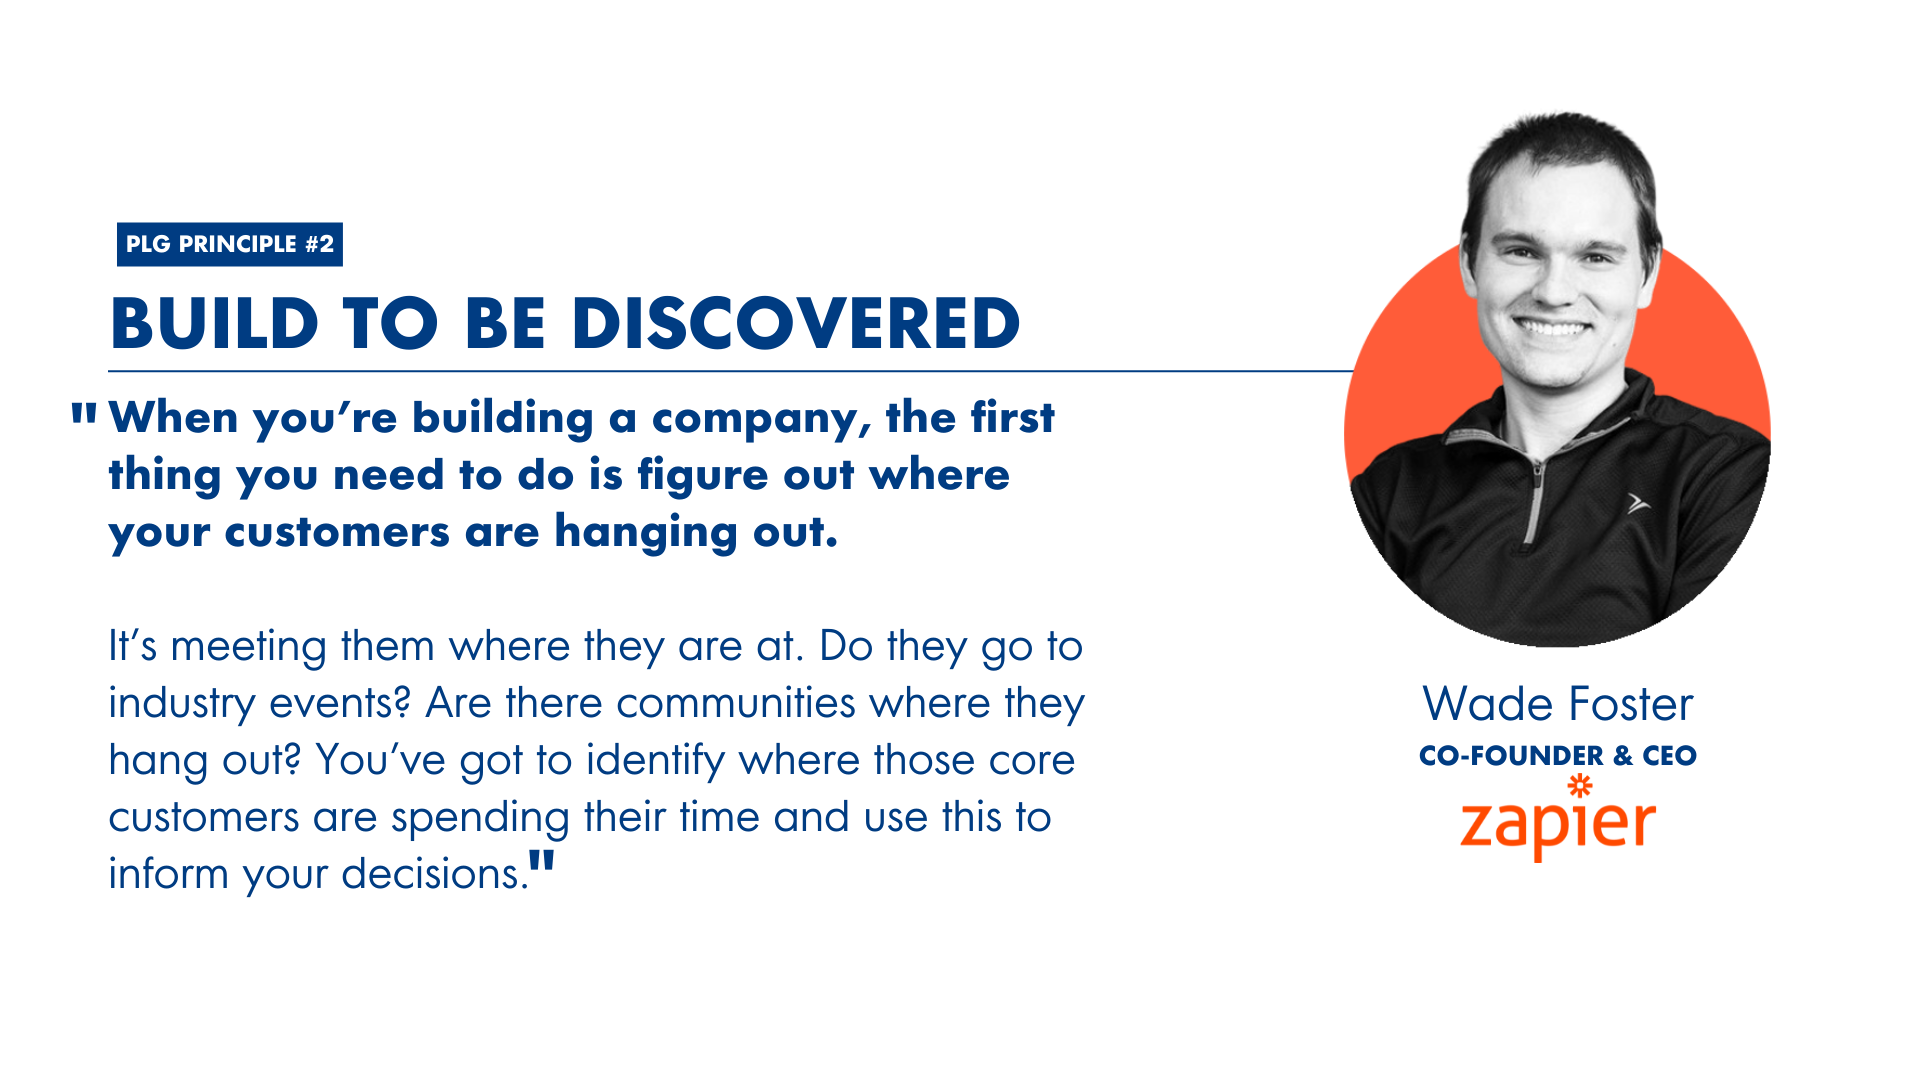 Zapier's Wade Foster discovery quote